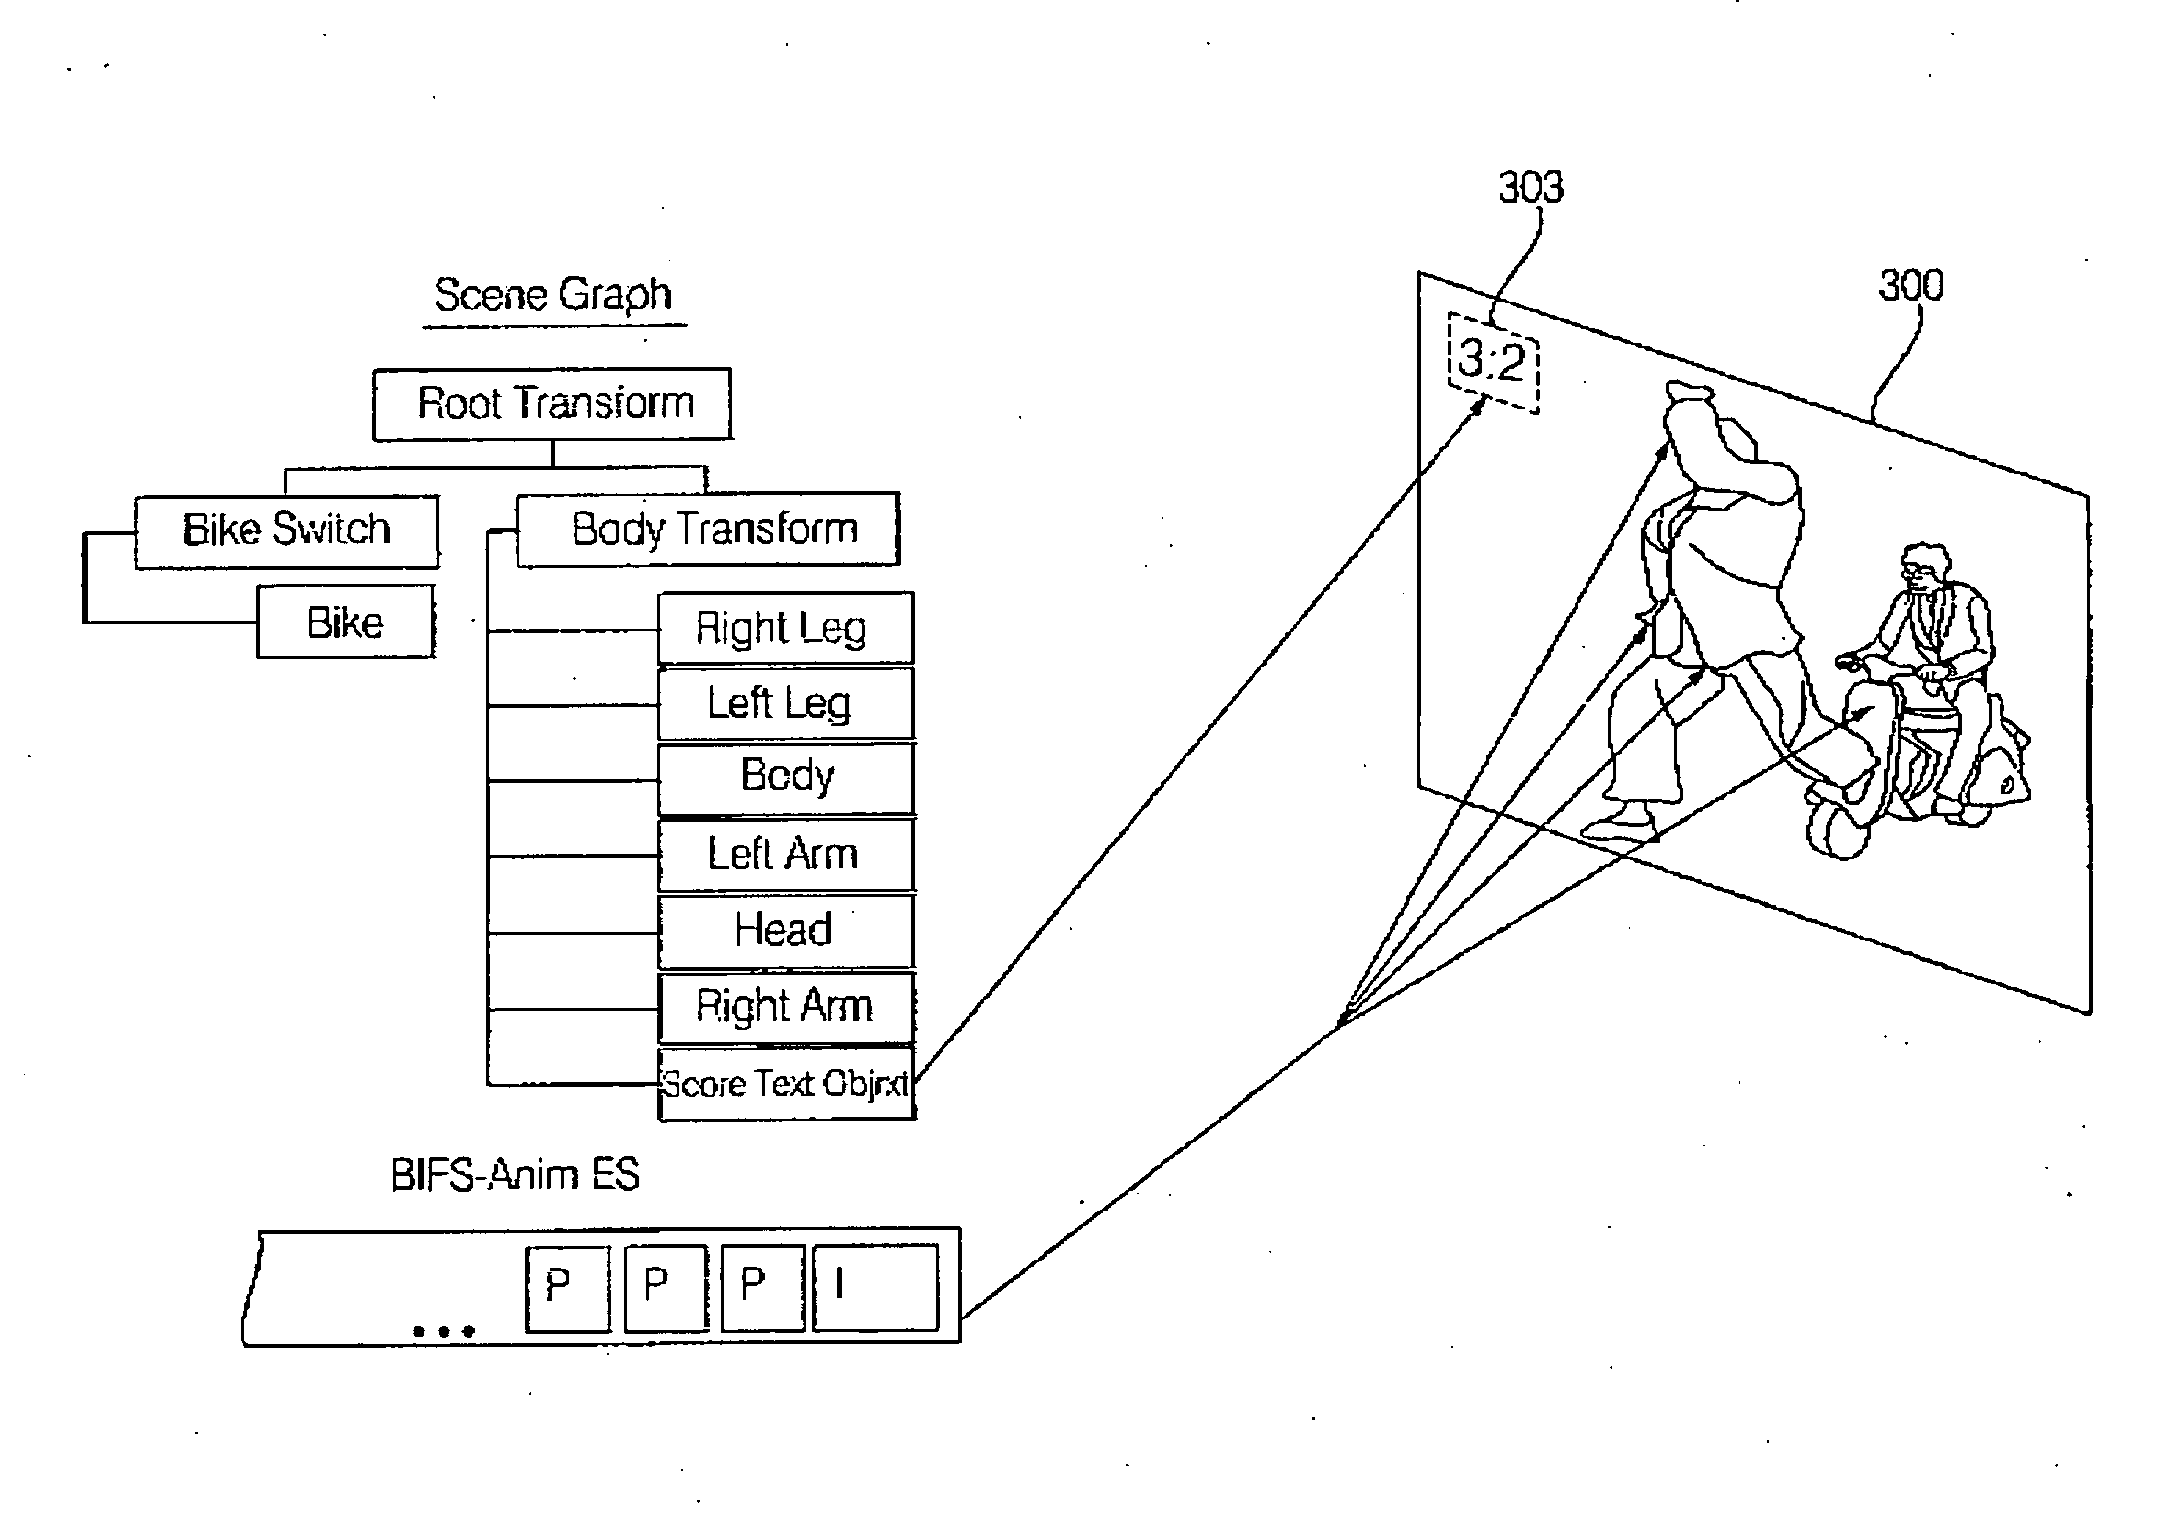 Broadcast receiver capable of displaying broadcast-related information using data service and method of controlling the broadcast receiver